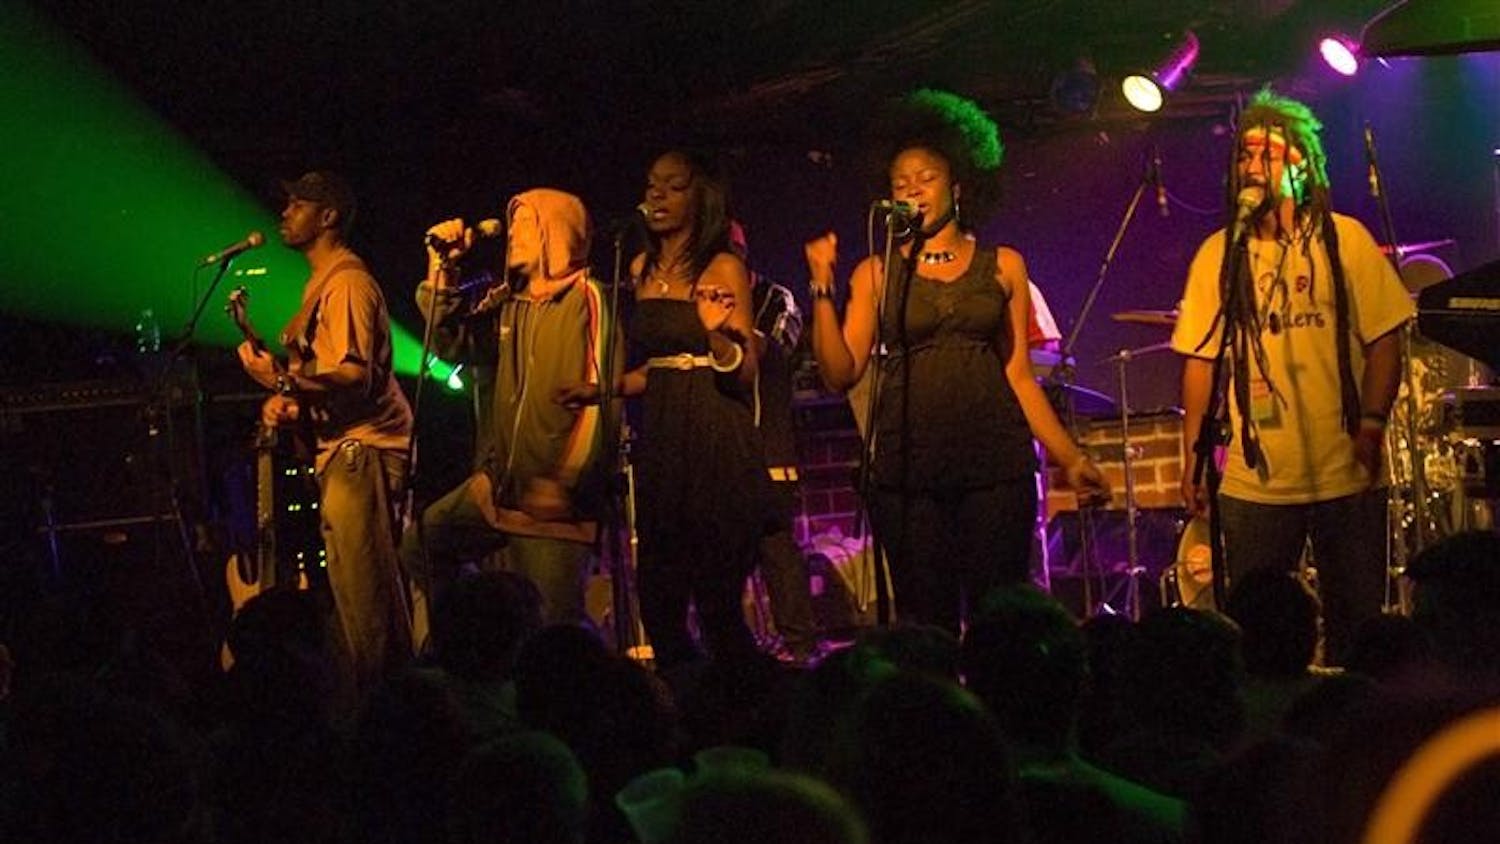 The Wailers, the backing band for the late Jamaican musician Bob Marley, perform reggae music for their Exodus 2009 tour at the Bluebird Thursday evening. Though none of the original members of the band remain, relatives of the founding members carry on the legacy playing Marley's music as well as the original tunes.